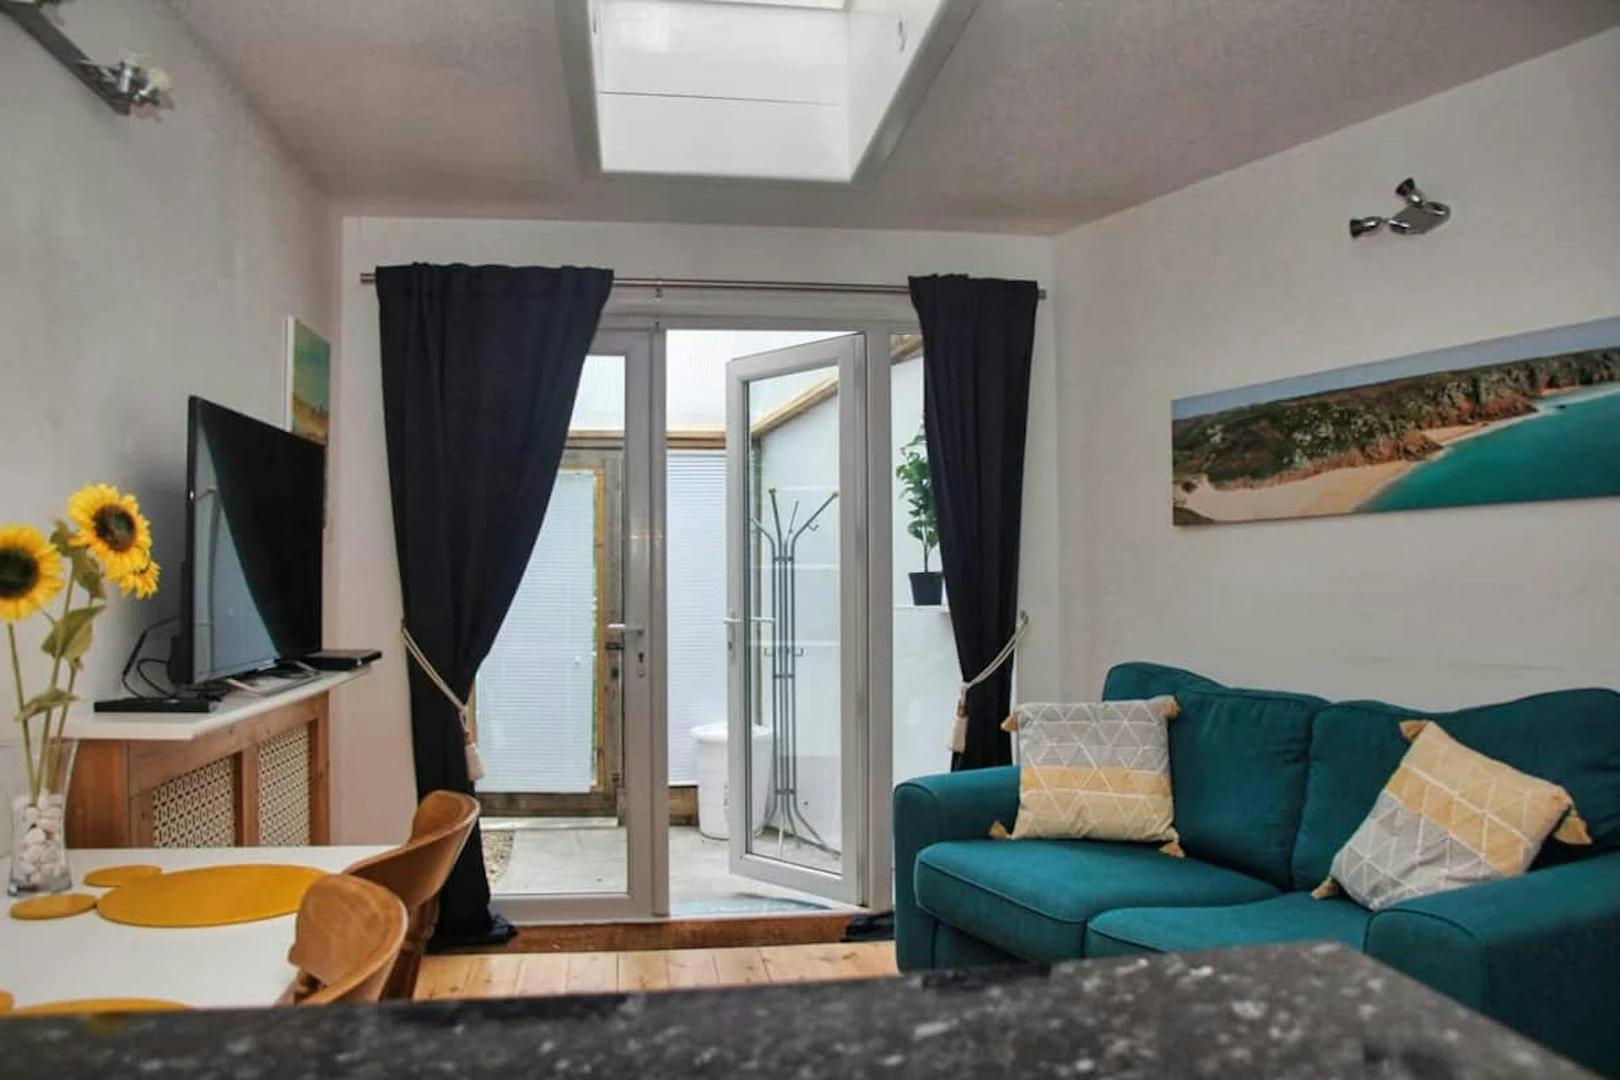 Two bedroom accommodation in Bath